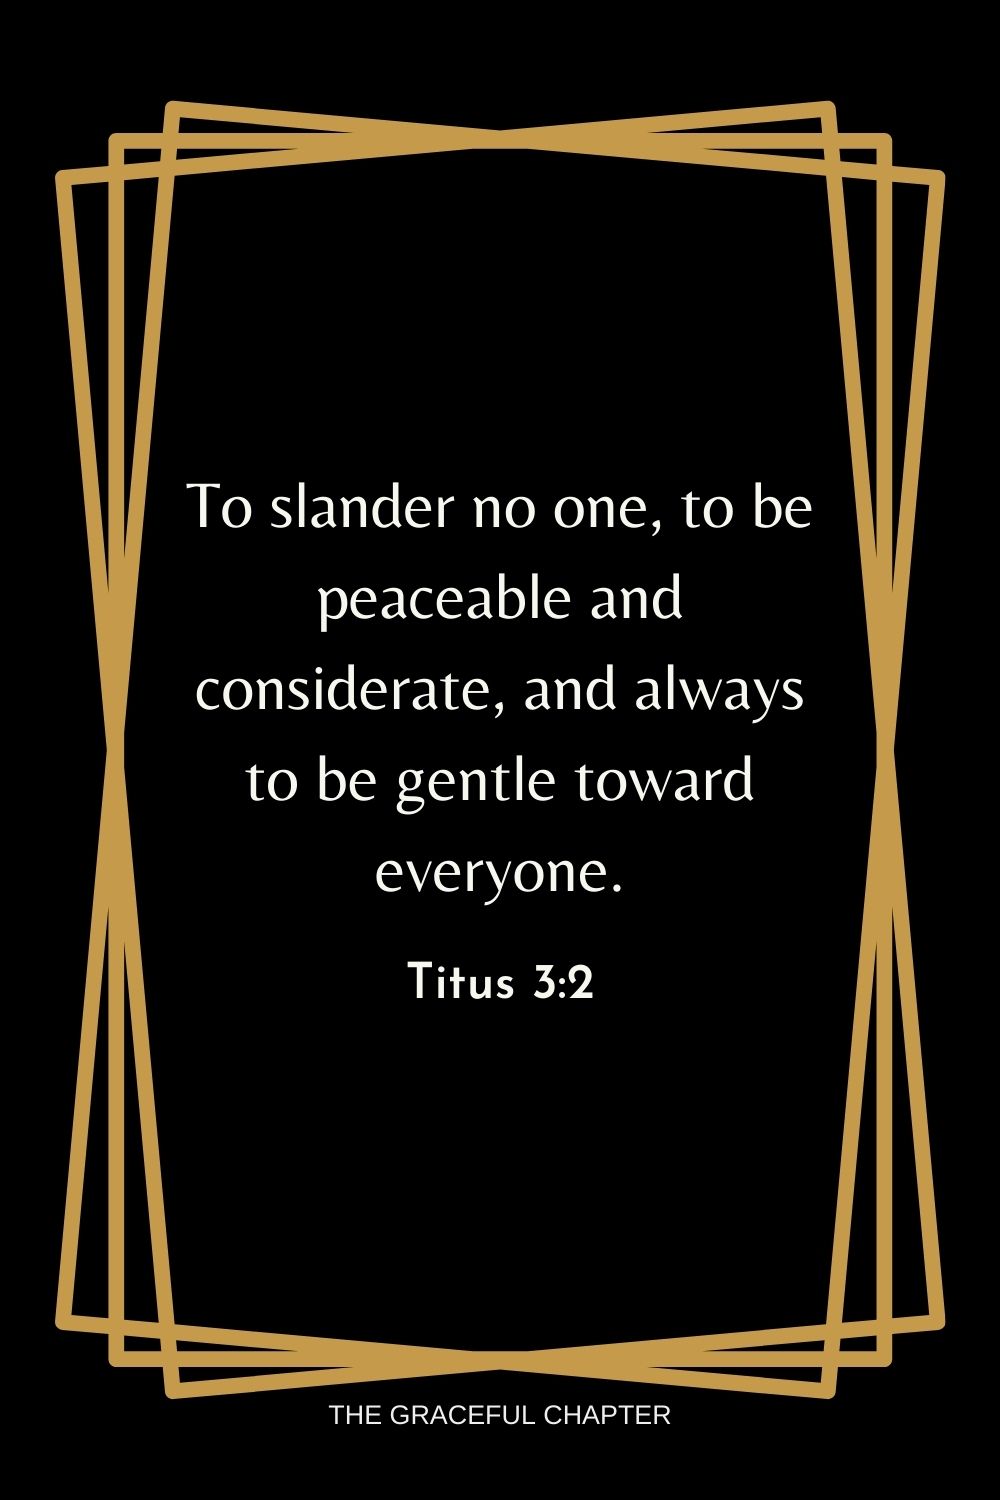 To slander no one, to be peaceable and considerate, and always to be gentle toward everyone. Titus 3:2